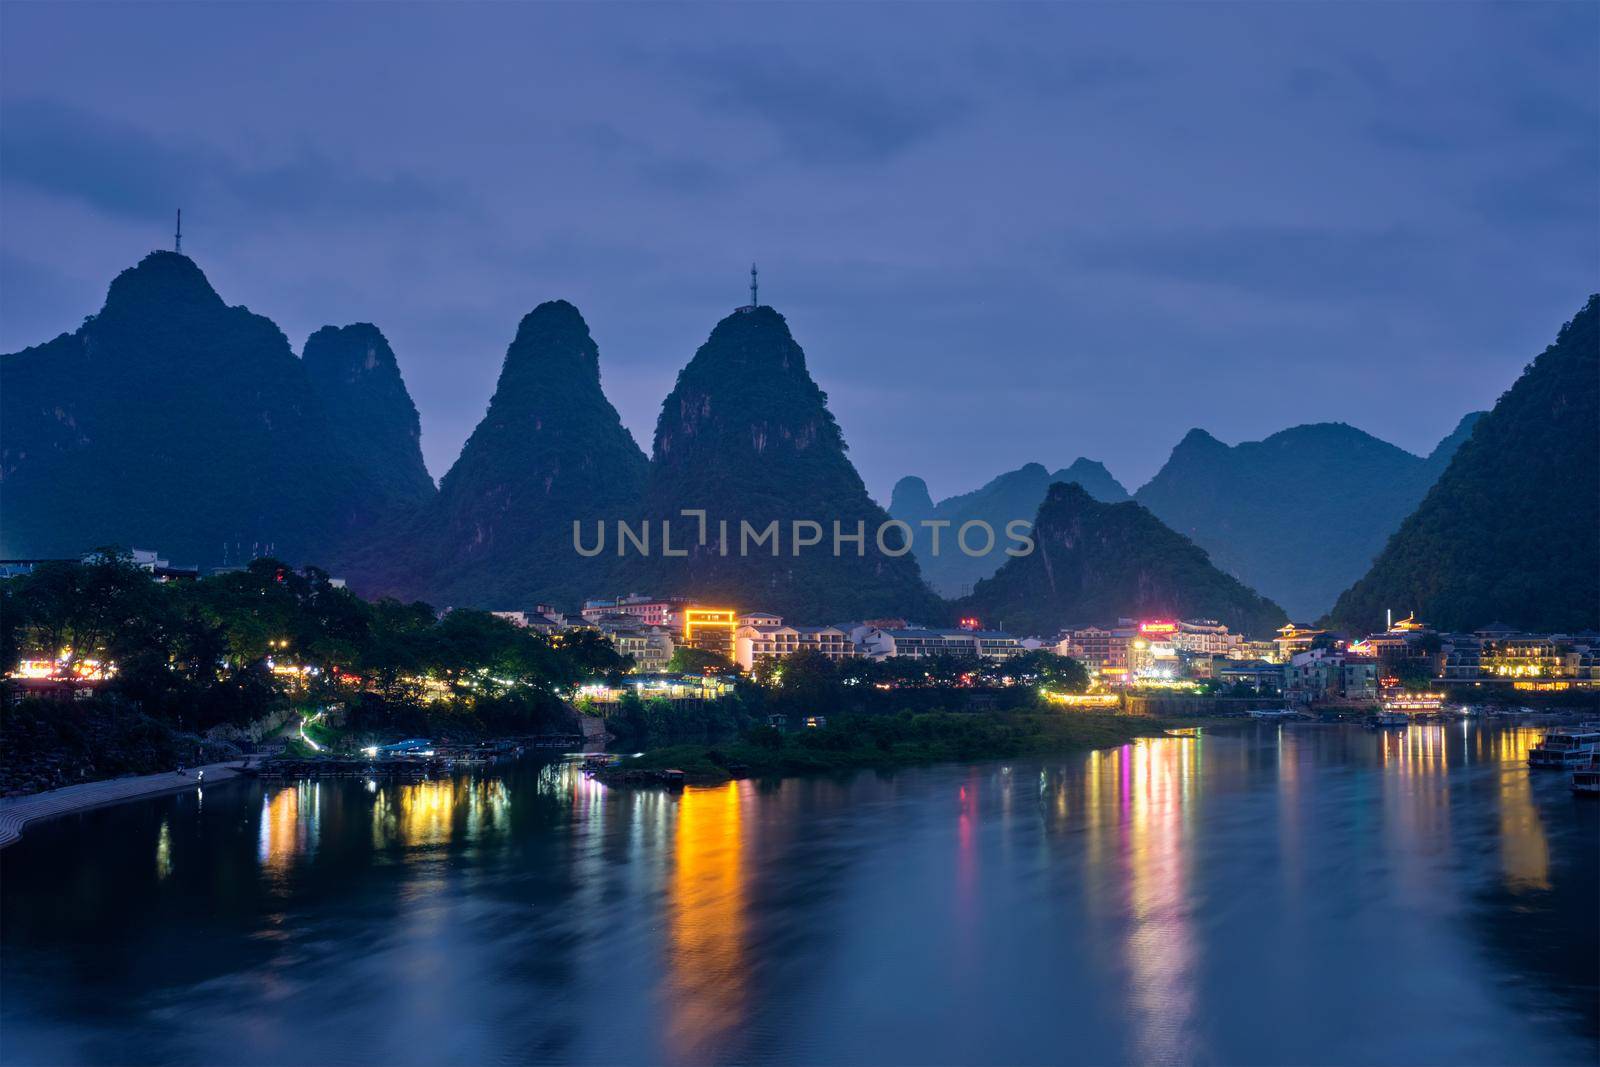 View of Yangshuo town illuminated in the evening with dramatic karst mountain landscape in background over Li river. Yangshuo, China